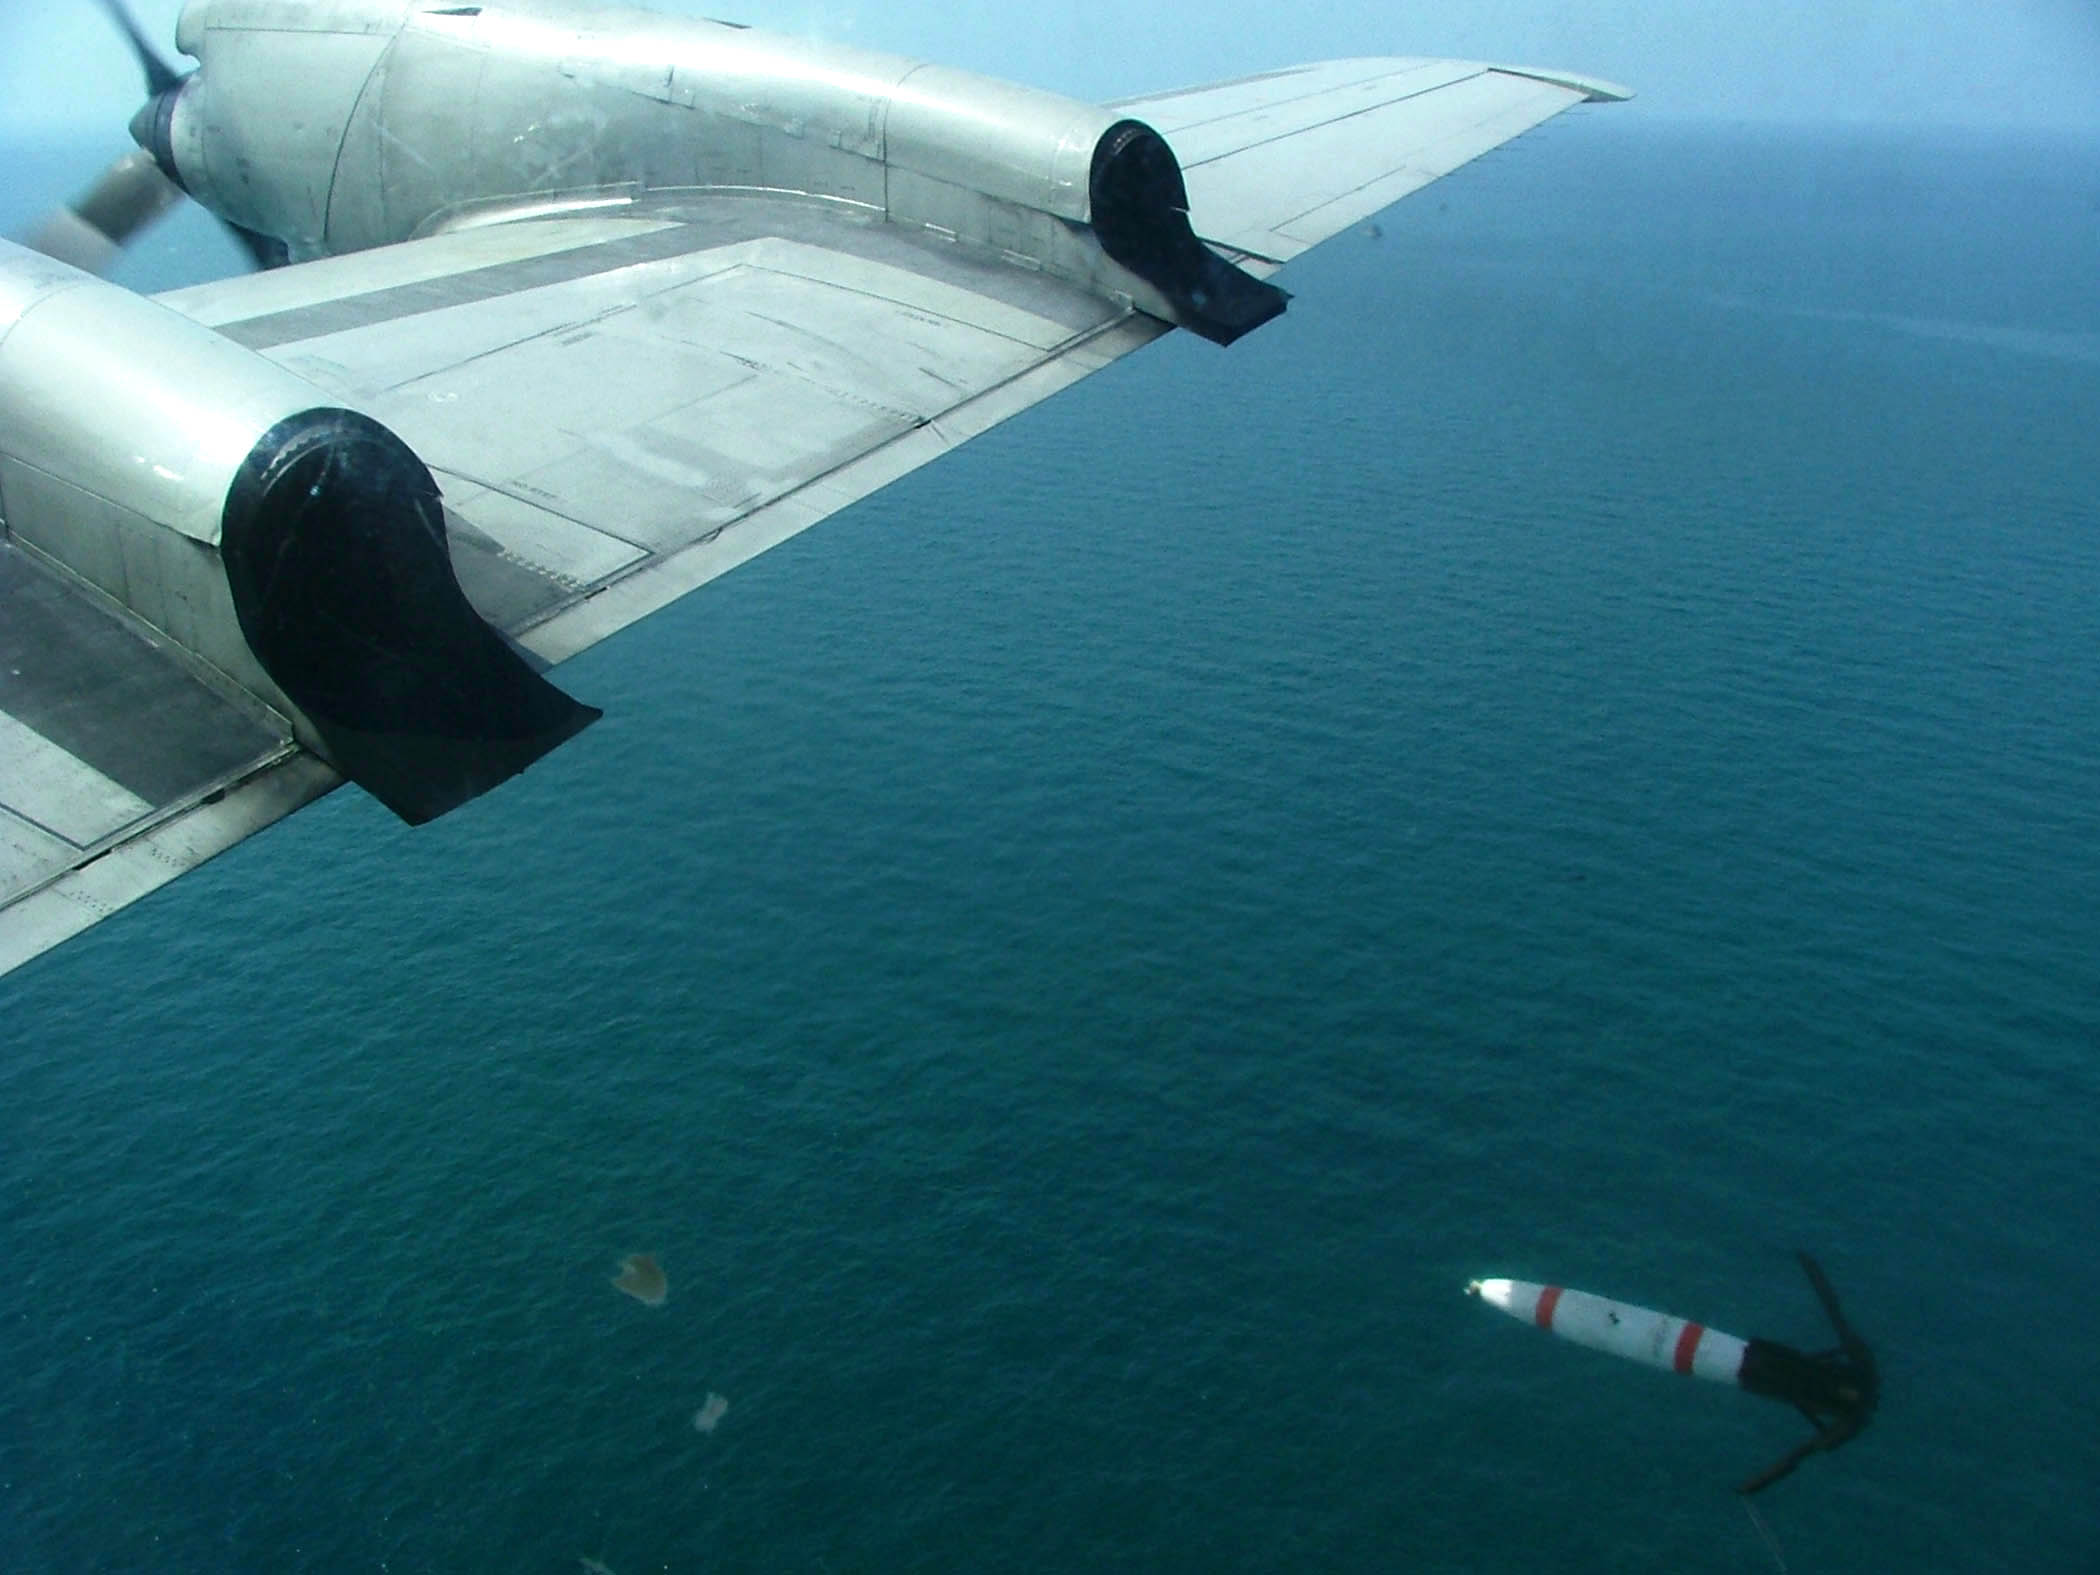 A MK 62 ÒQuick Strike mine is deployed from the starboard wing of a P-3C Orion aircraft in 2004. US Navy Photo